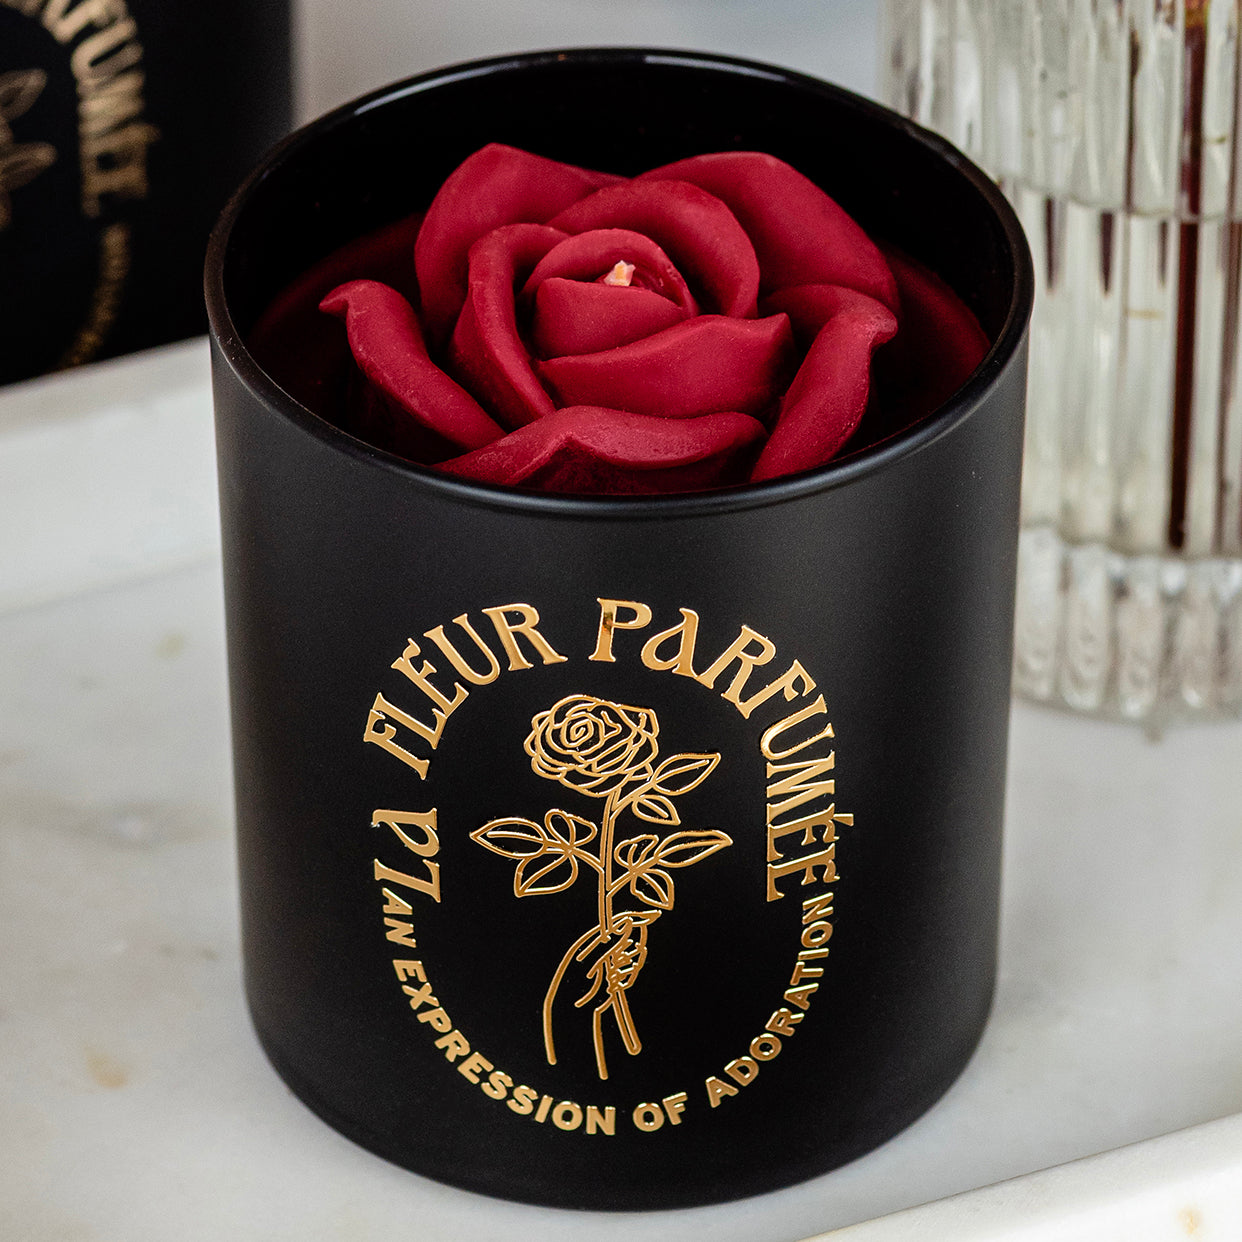 An elegant luxurious black candle with a gold emblem that reads La Fleur Parfumée An Expression of Adoration, and is topped with a red sculpted wax rose